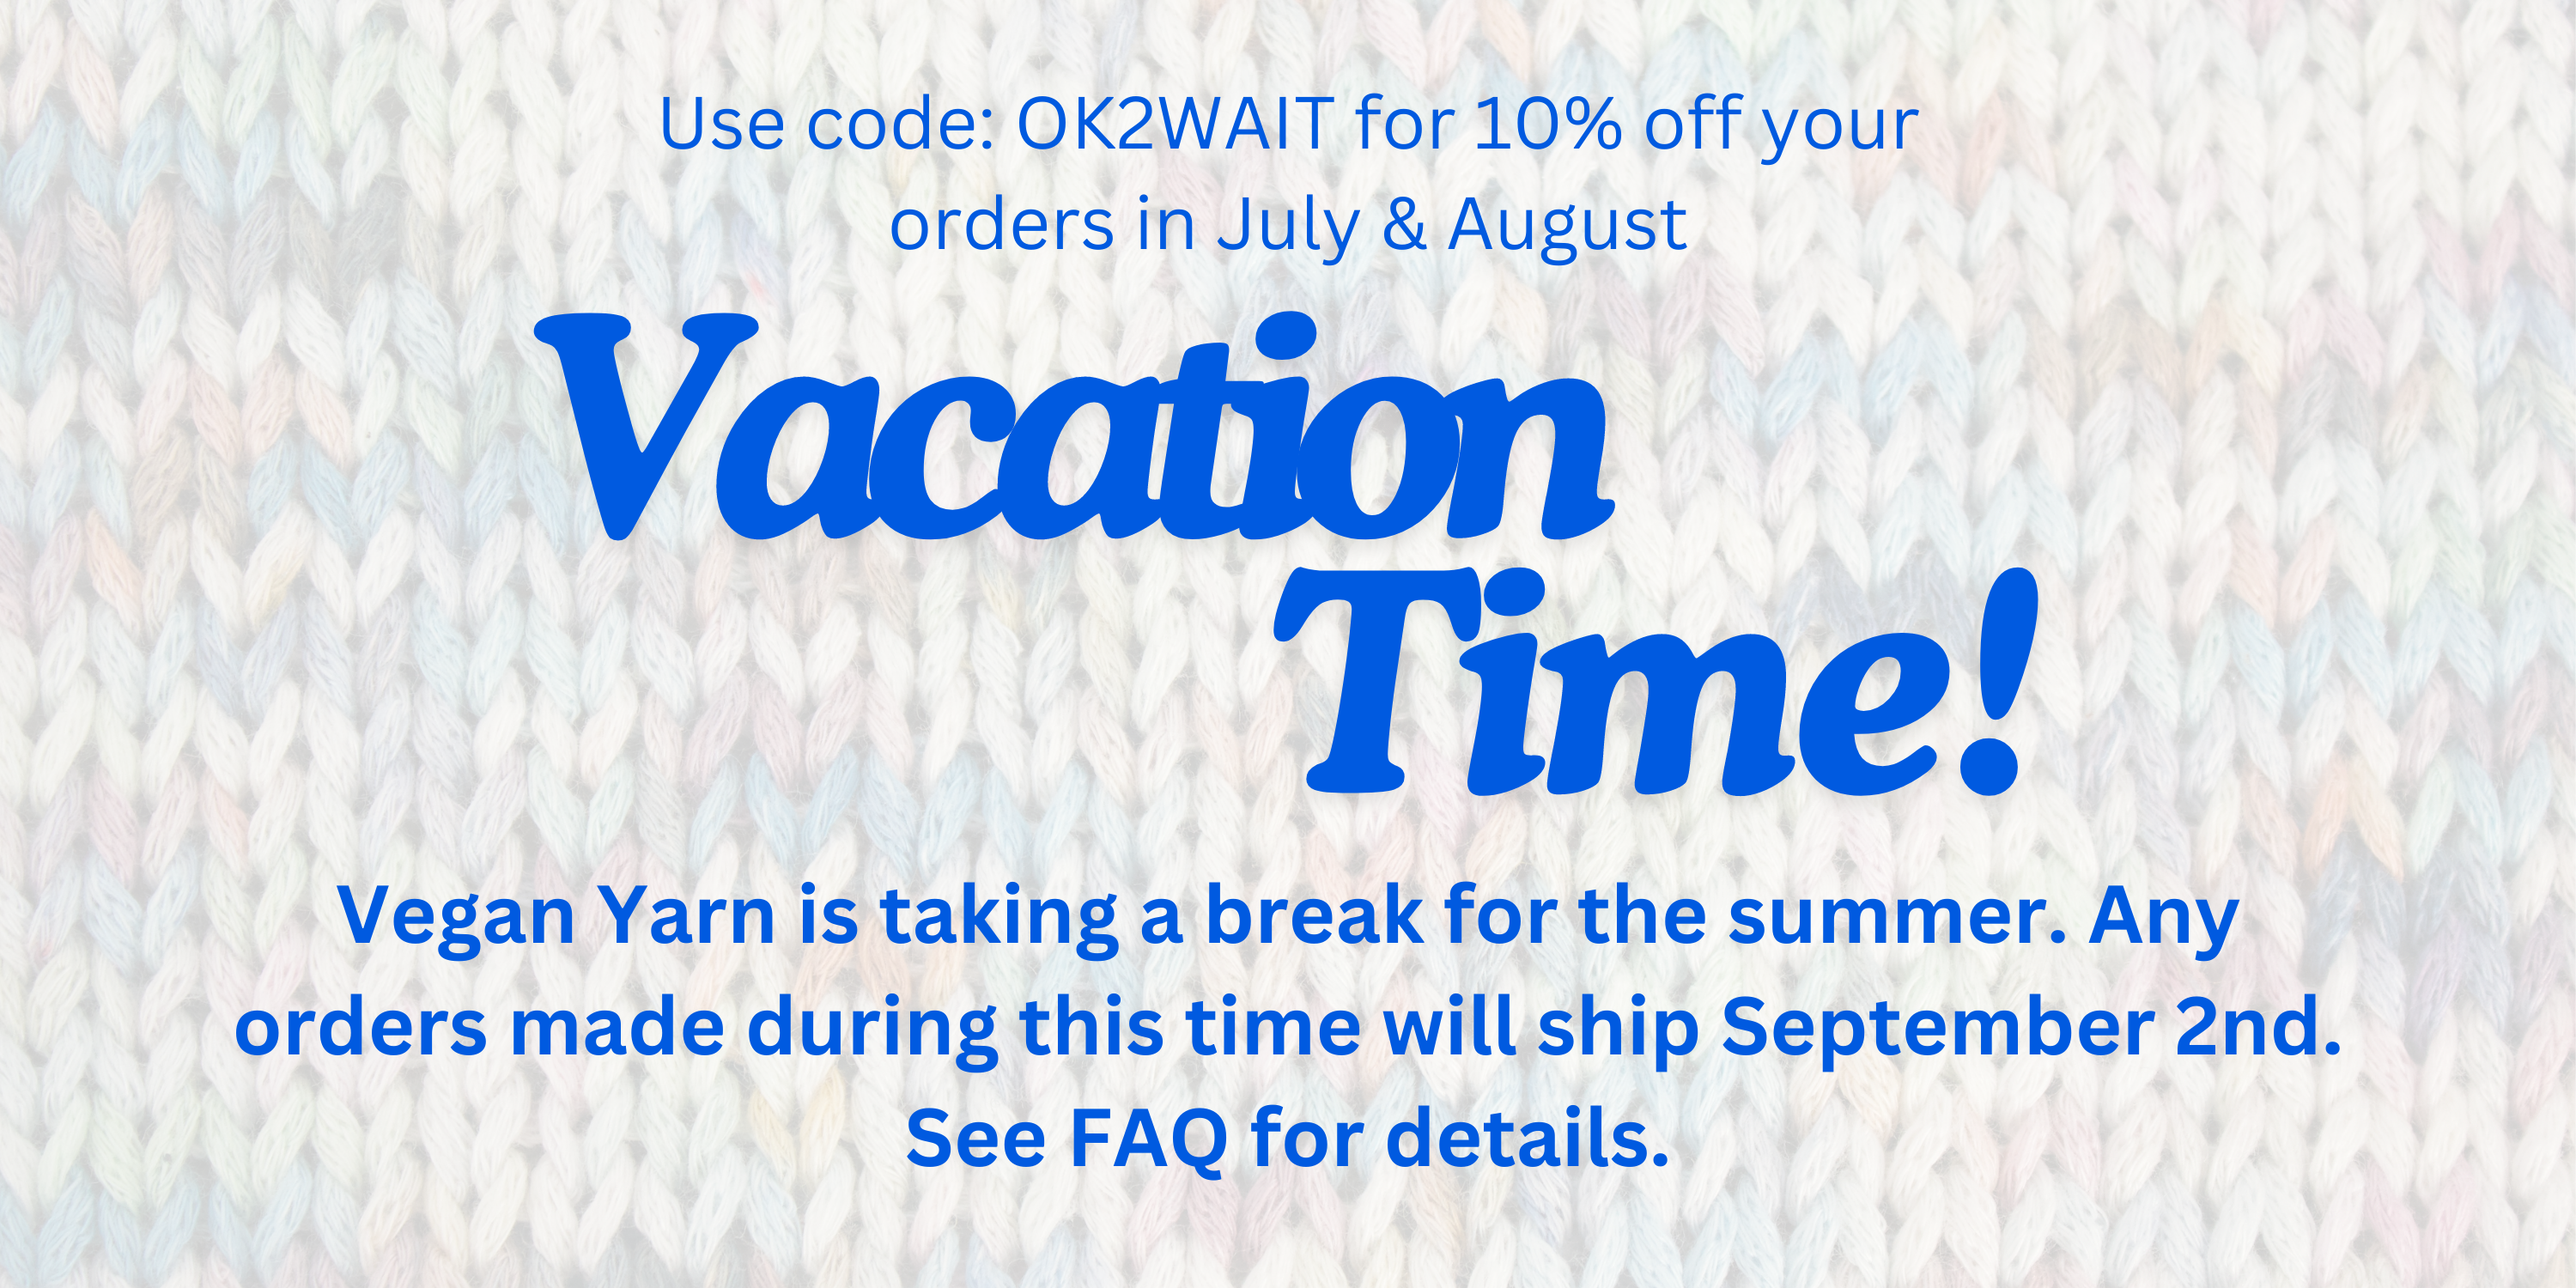 Vegan Yarn is taking a break for the summer. Any orders made during this time will ship September 2nd. See FAQ for details.